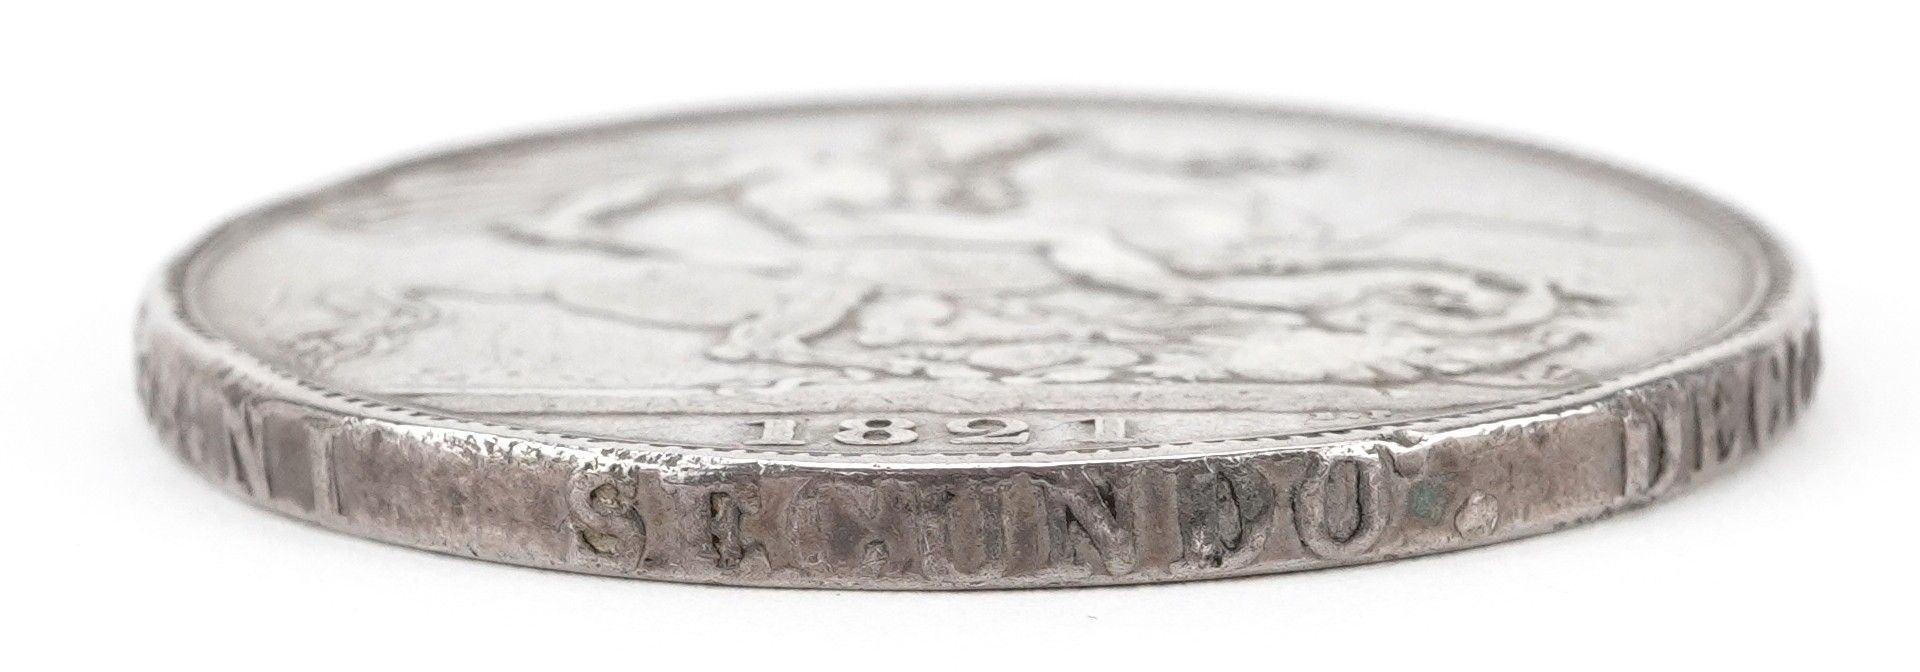 George IV 1821 silver crown, Secondo edge - Image 3 of 3